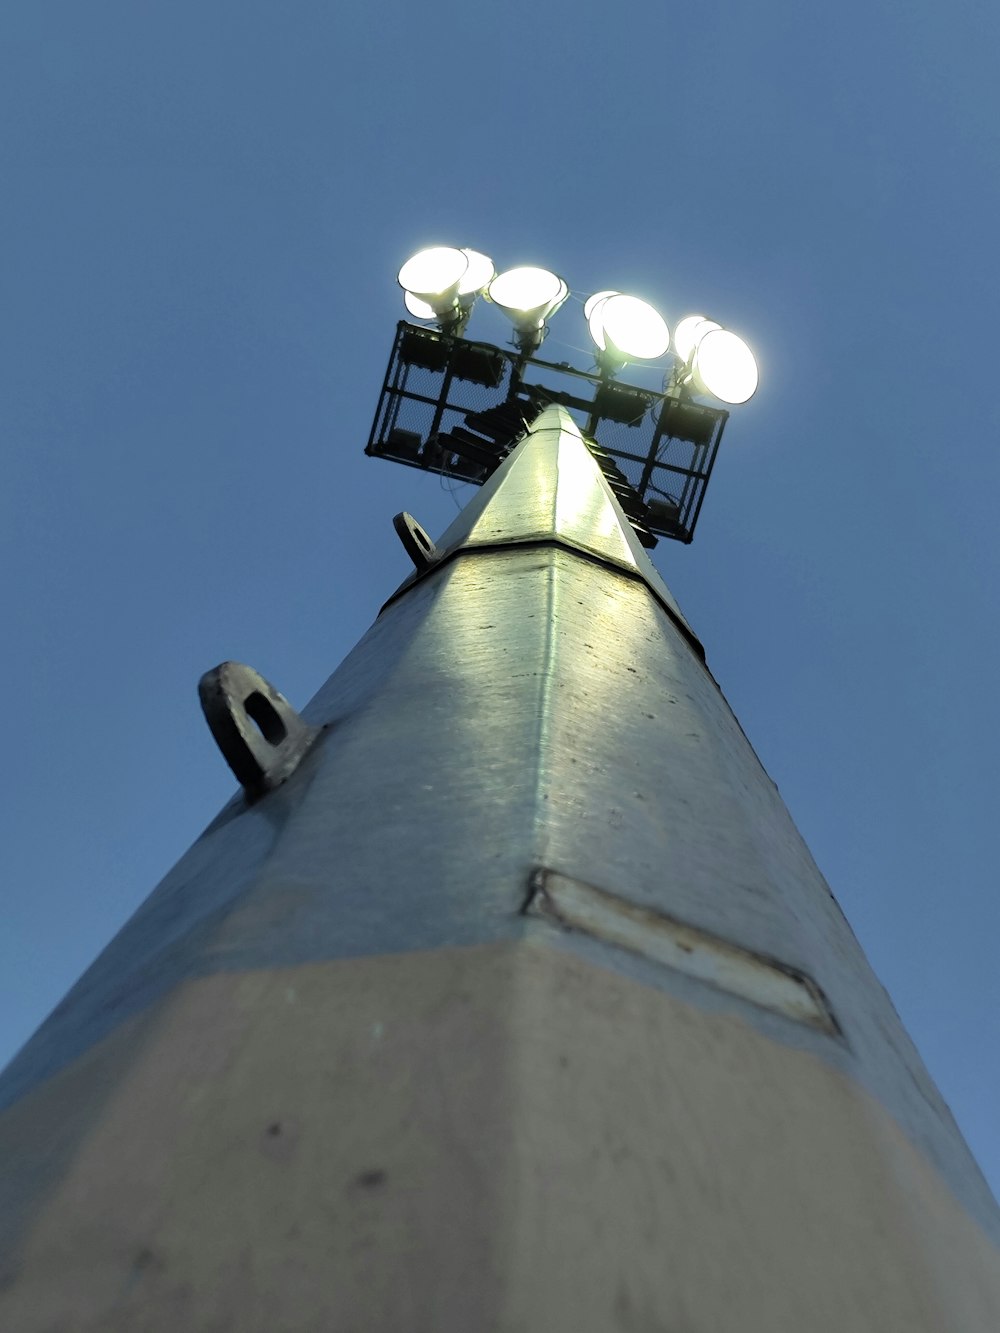 a tall light tower with four lights on top